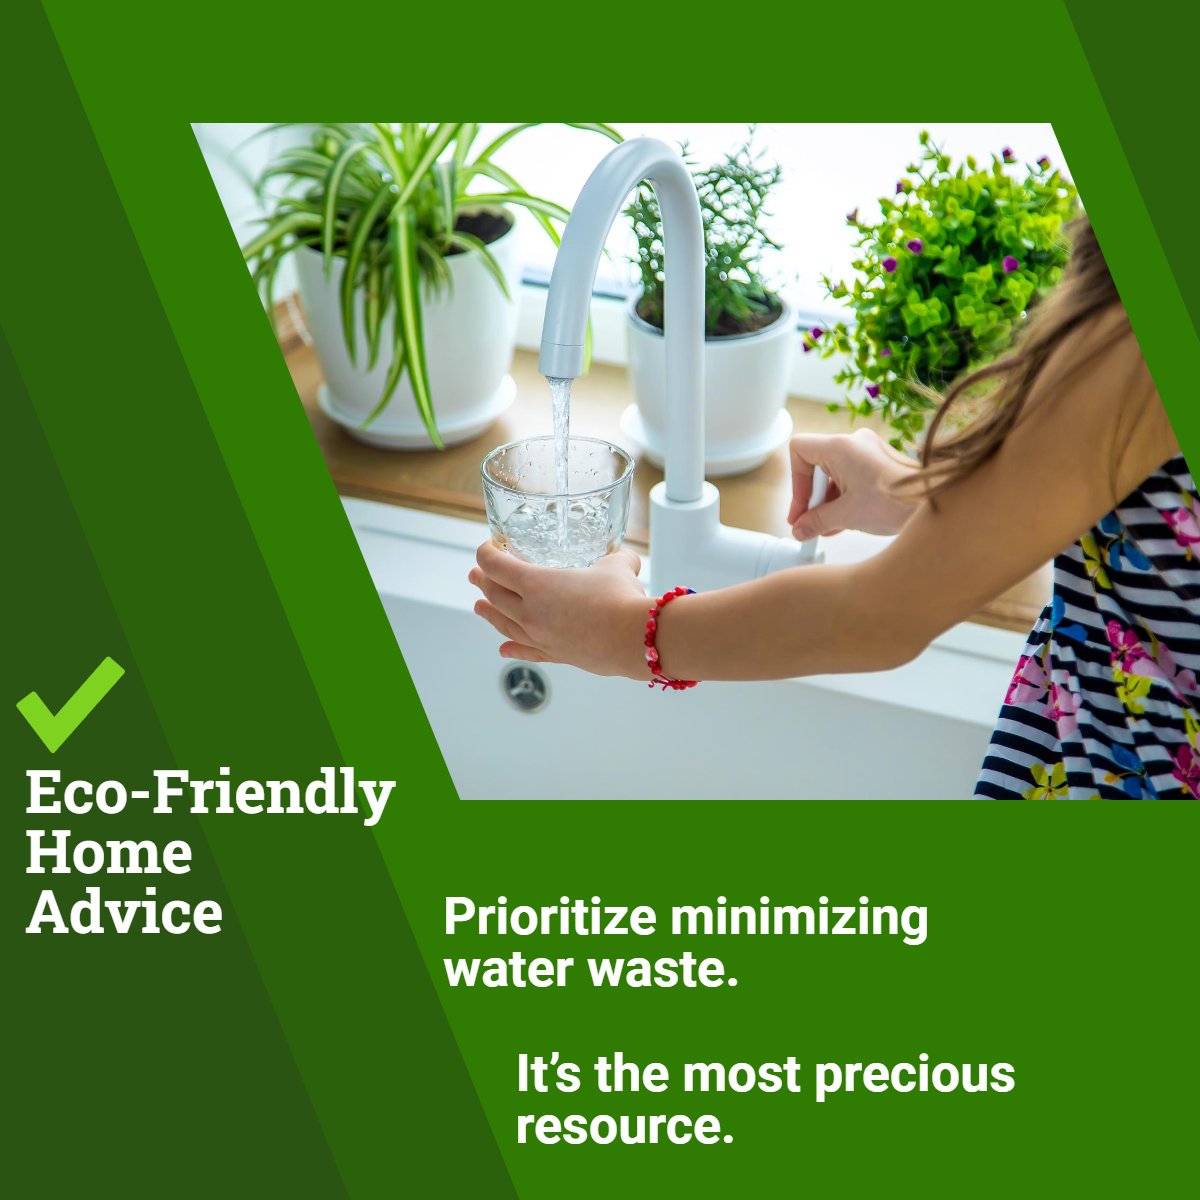 Do you want to reduce your ecological footprint?

Share your own eco-friendly tips 🏡💪 

#EcoFriendlyHome #GreenLiving #SustainableLiving
 #AmericasMortgageSolutions #christianpenner #onestopbrokershop #mortgagebrokerwestpalmbeach #epicrealeststedeals